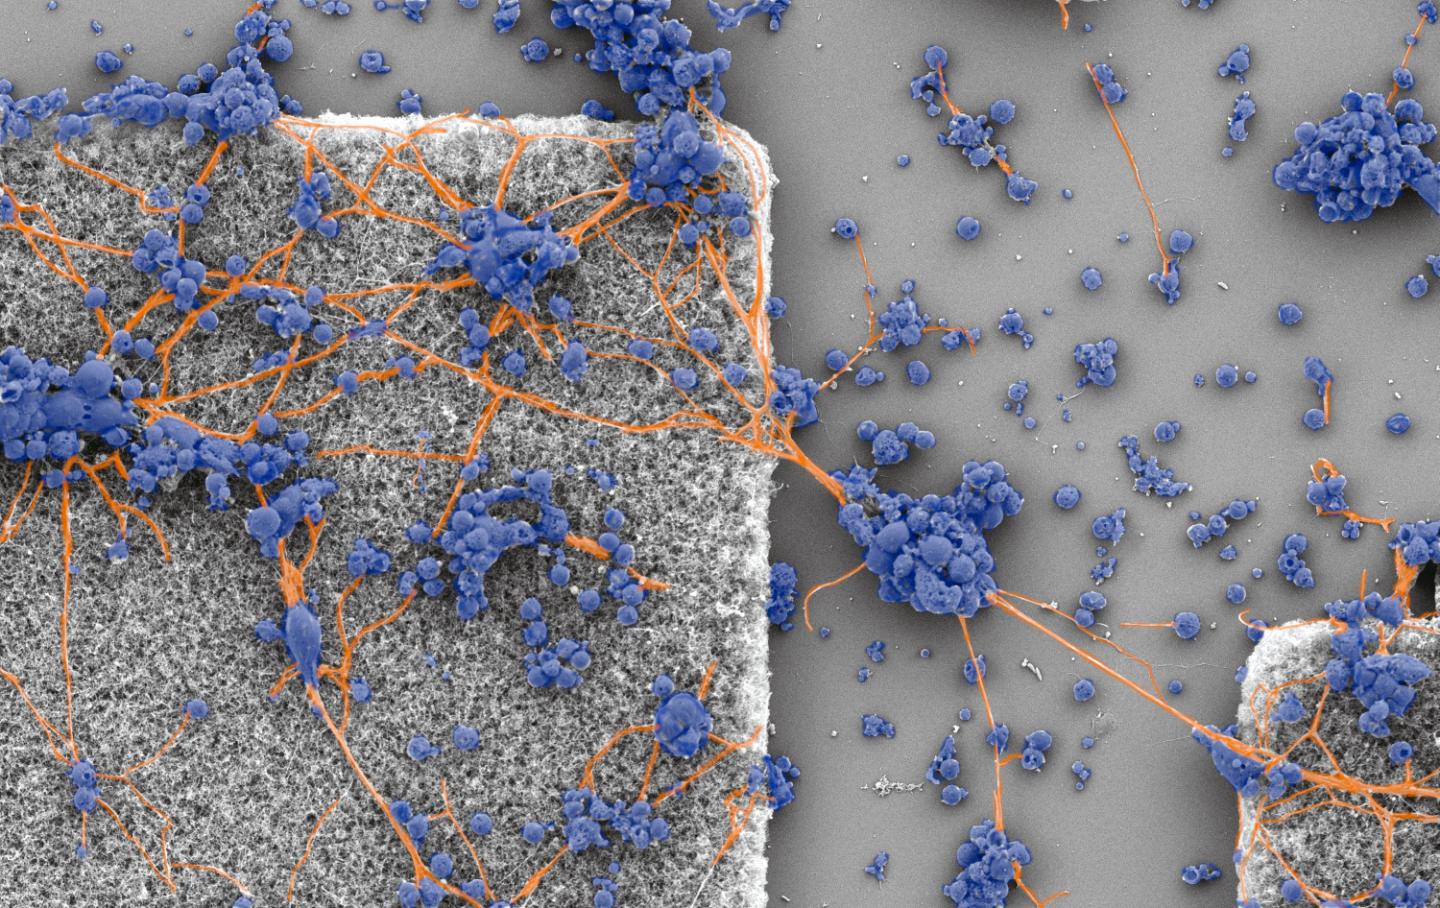 Neurons on electrode